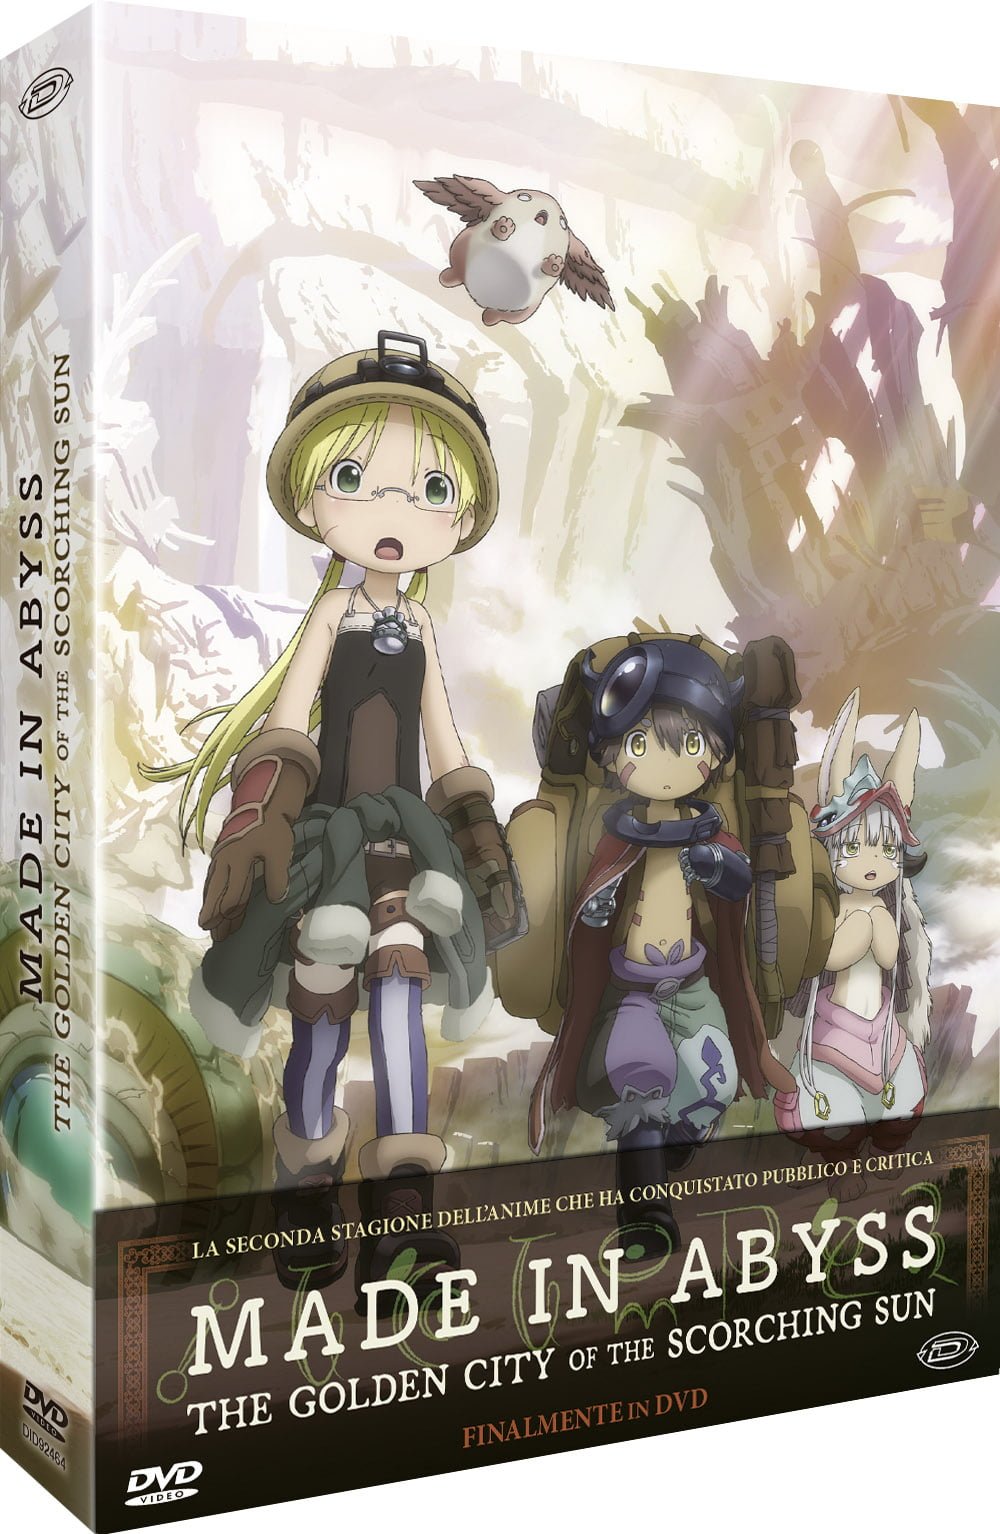 MADE IN ABYSS: THE GOLDEN CITY OF THE SCORCHING SUN LIMITED EDITION BOX (EPS. 01-12) (3 DVD)